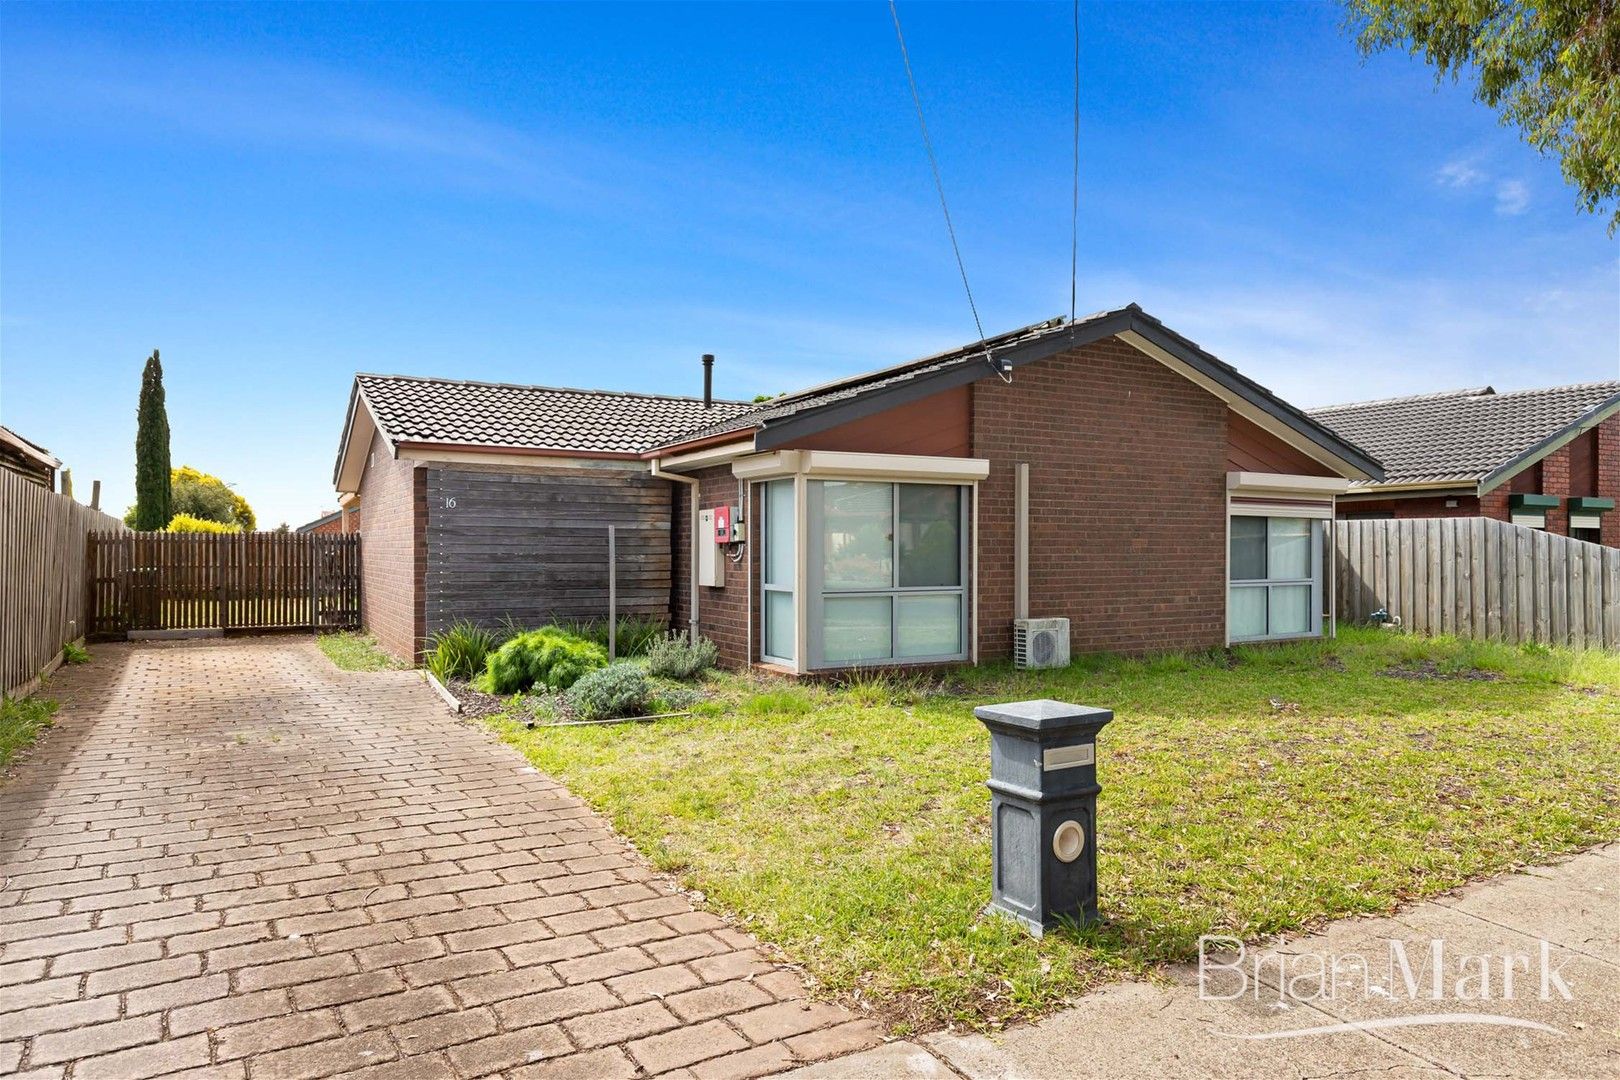 3 bedrooms House in 16 Dennison Avenue HOPPERS CROSSING VIC, 3029